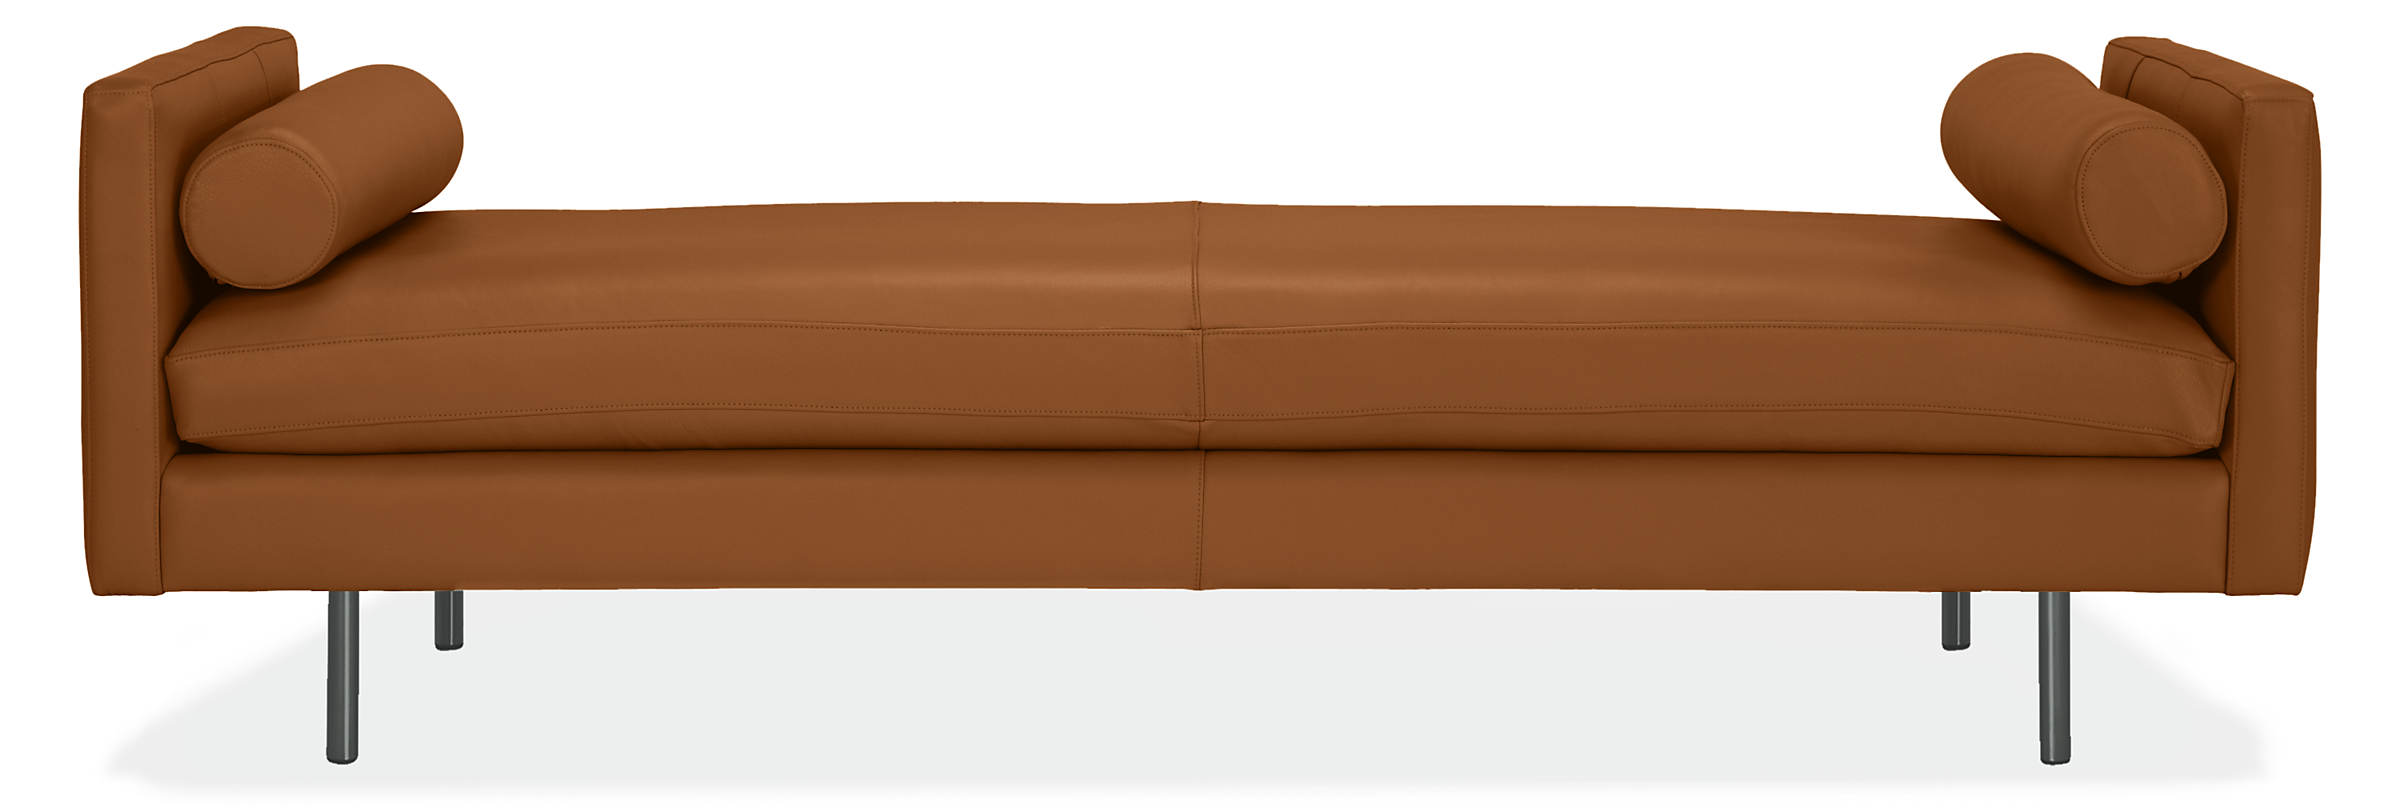 Jasper Leather Daybeds